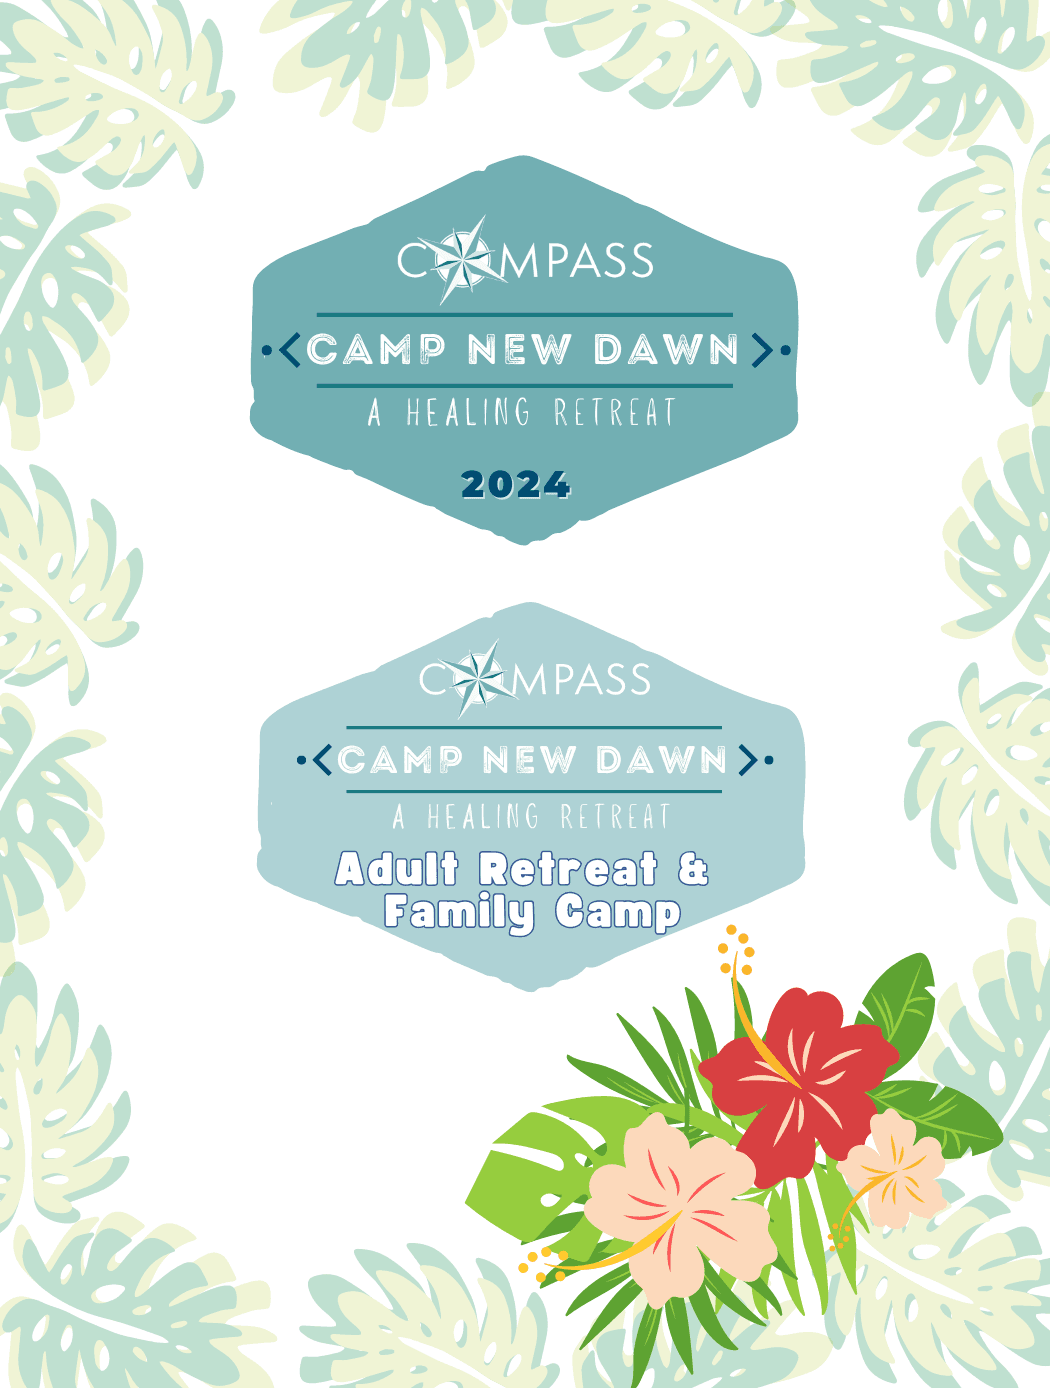 Compass is hosting Camp New Dawn, August 10-12 and Adult & Family Retreat, August 11-13 at Camp Pecometh.